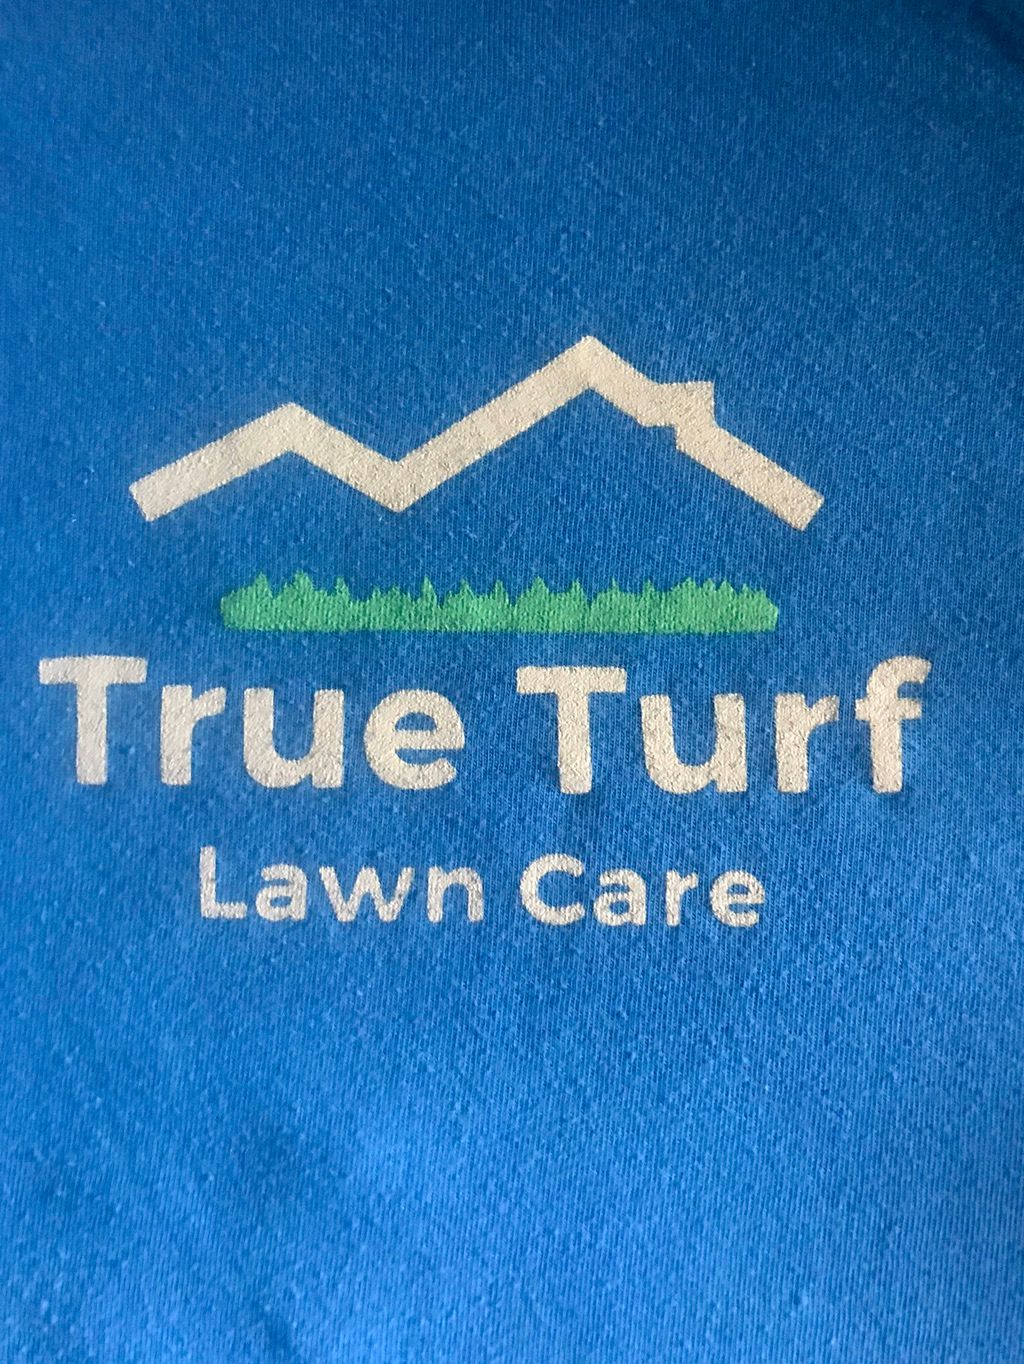 True Turf Lawn and Landscaping